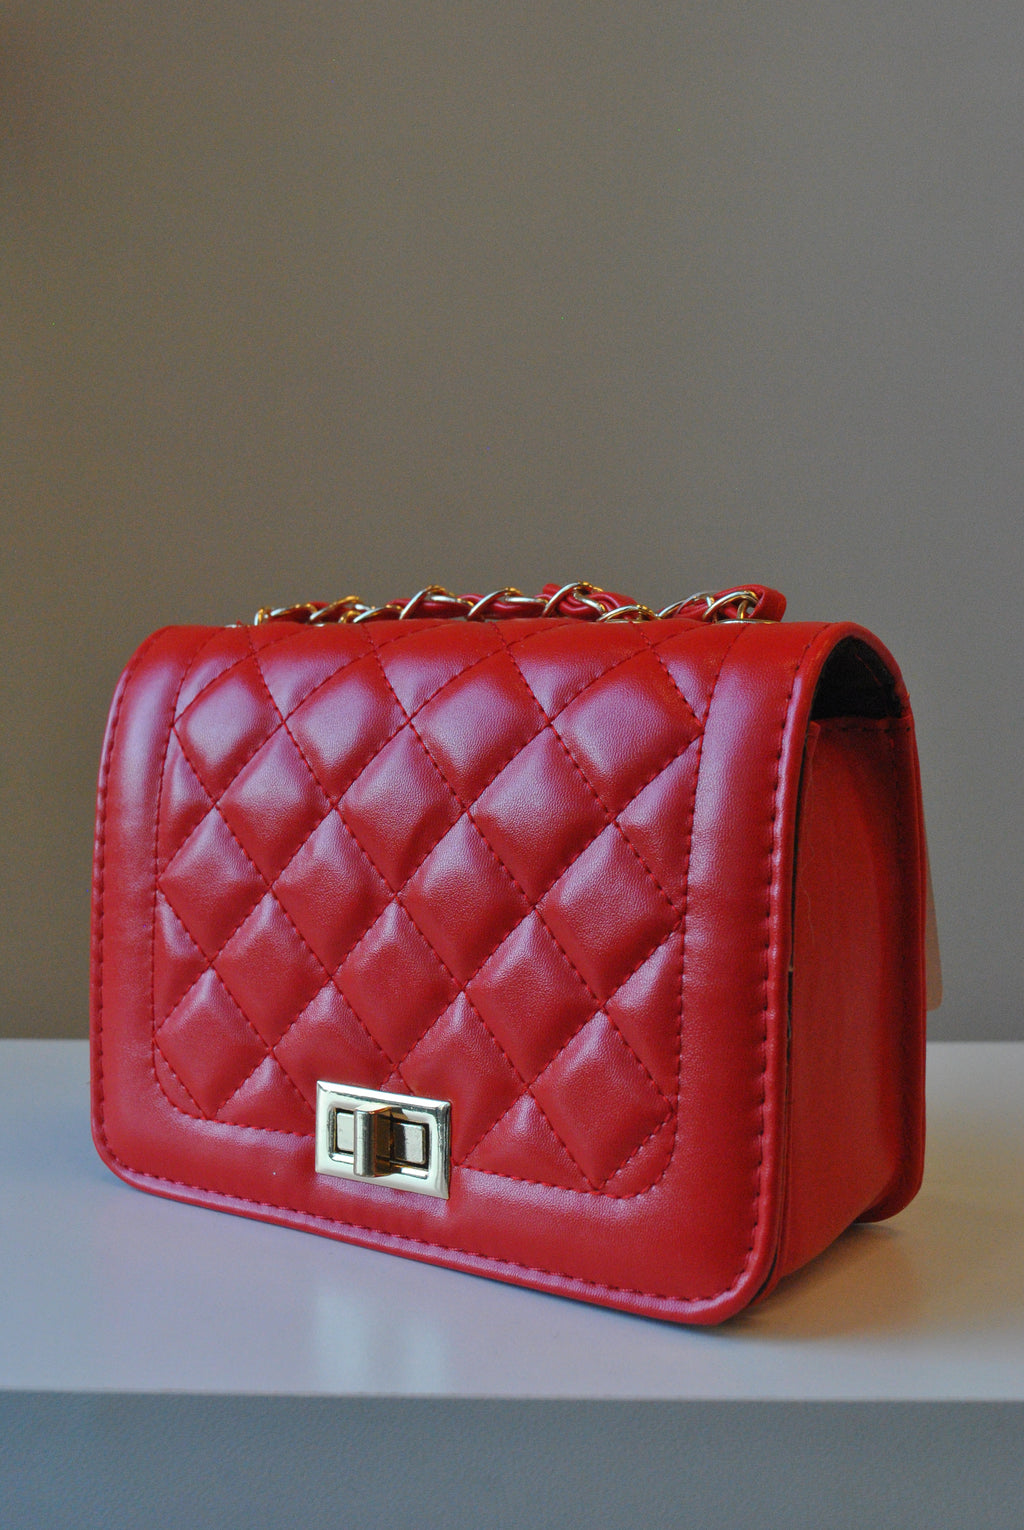 RED SMALL GUILTED CROSSBODY BAG